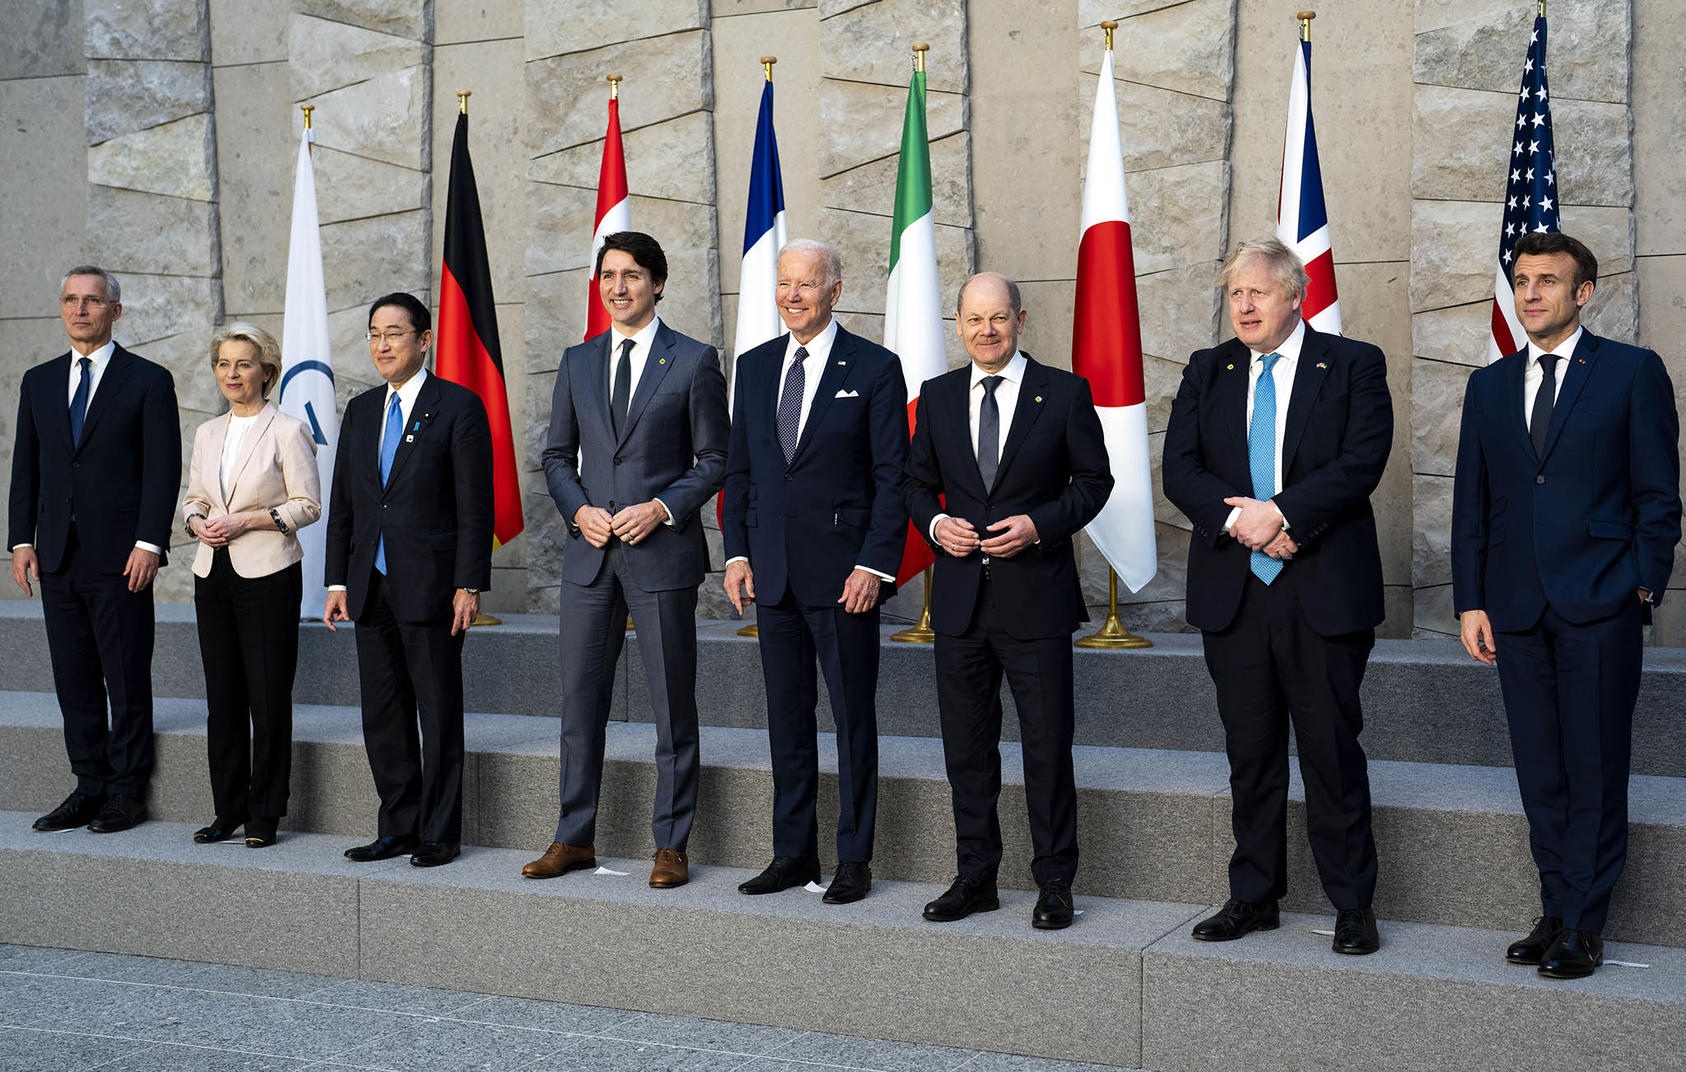 Japanese Prime Minister Kishida, third from left, poses for a group photo with world leaders at NATO headquarters in Brussels, Belgium. March 24, 2022. (Doug Mills/The New York Times)